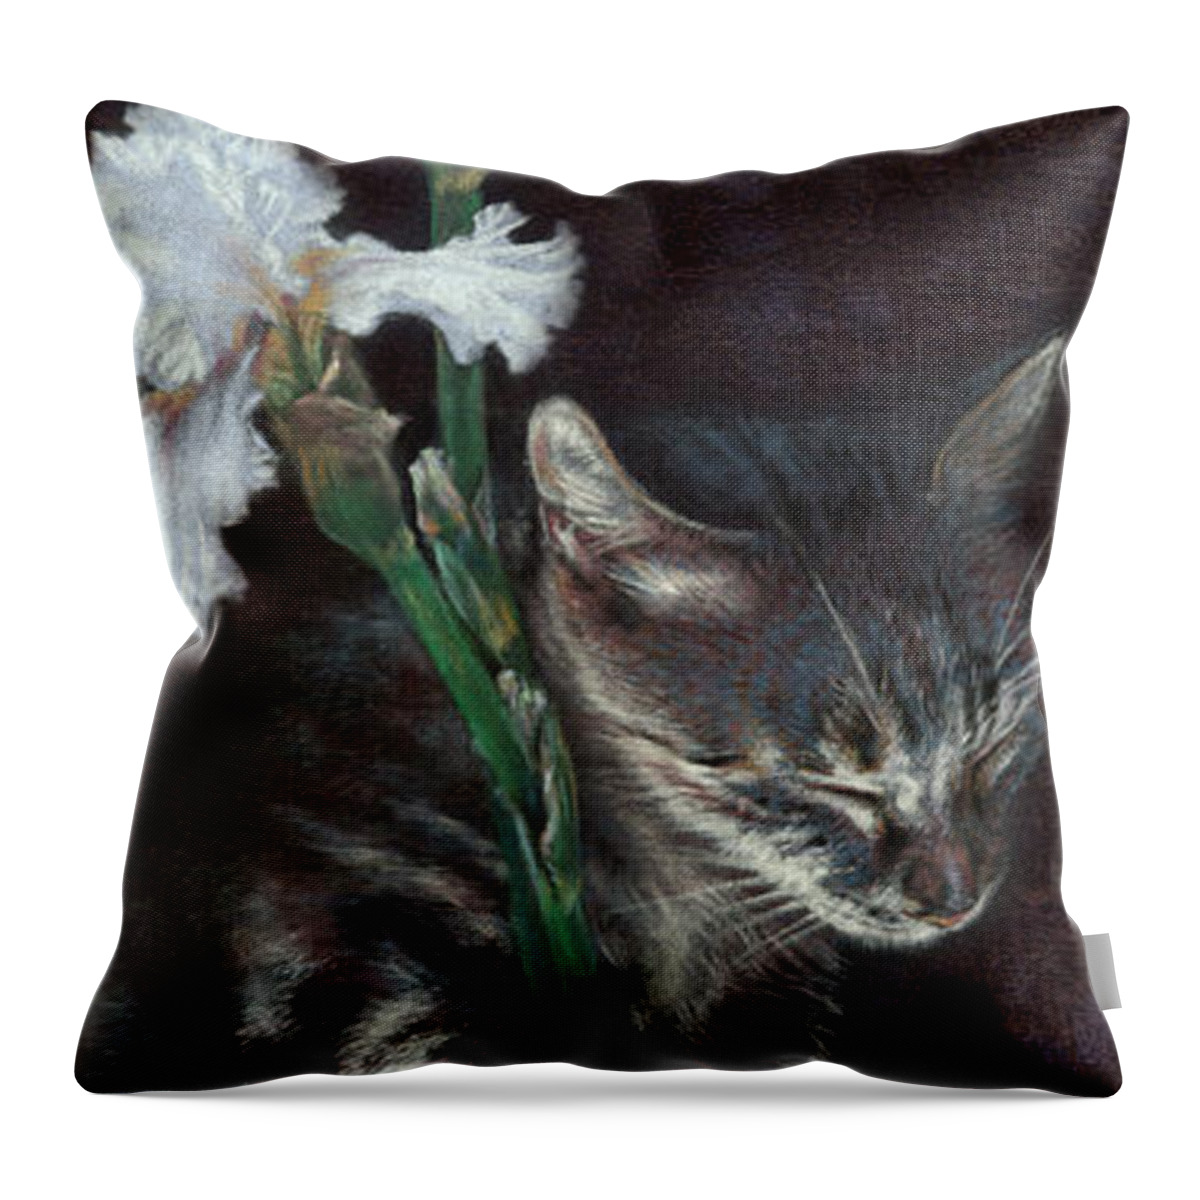 Cat Throw Pillow featuring the painting Spirit by Ragen Mendenhall